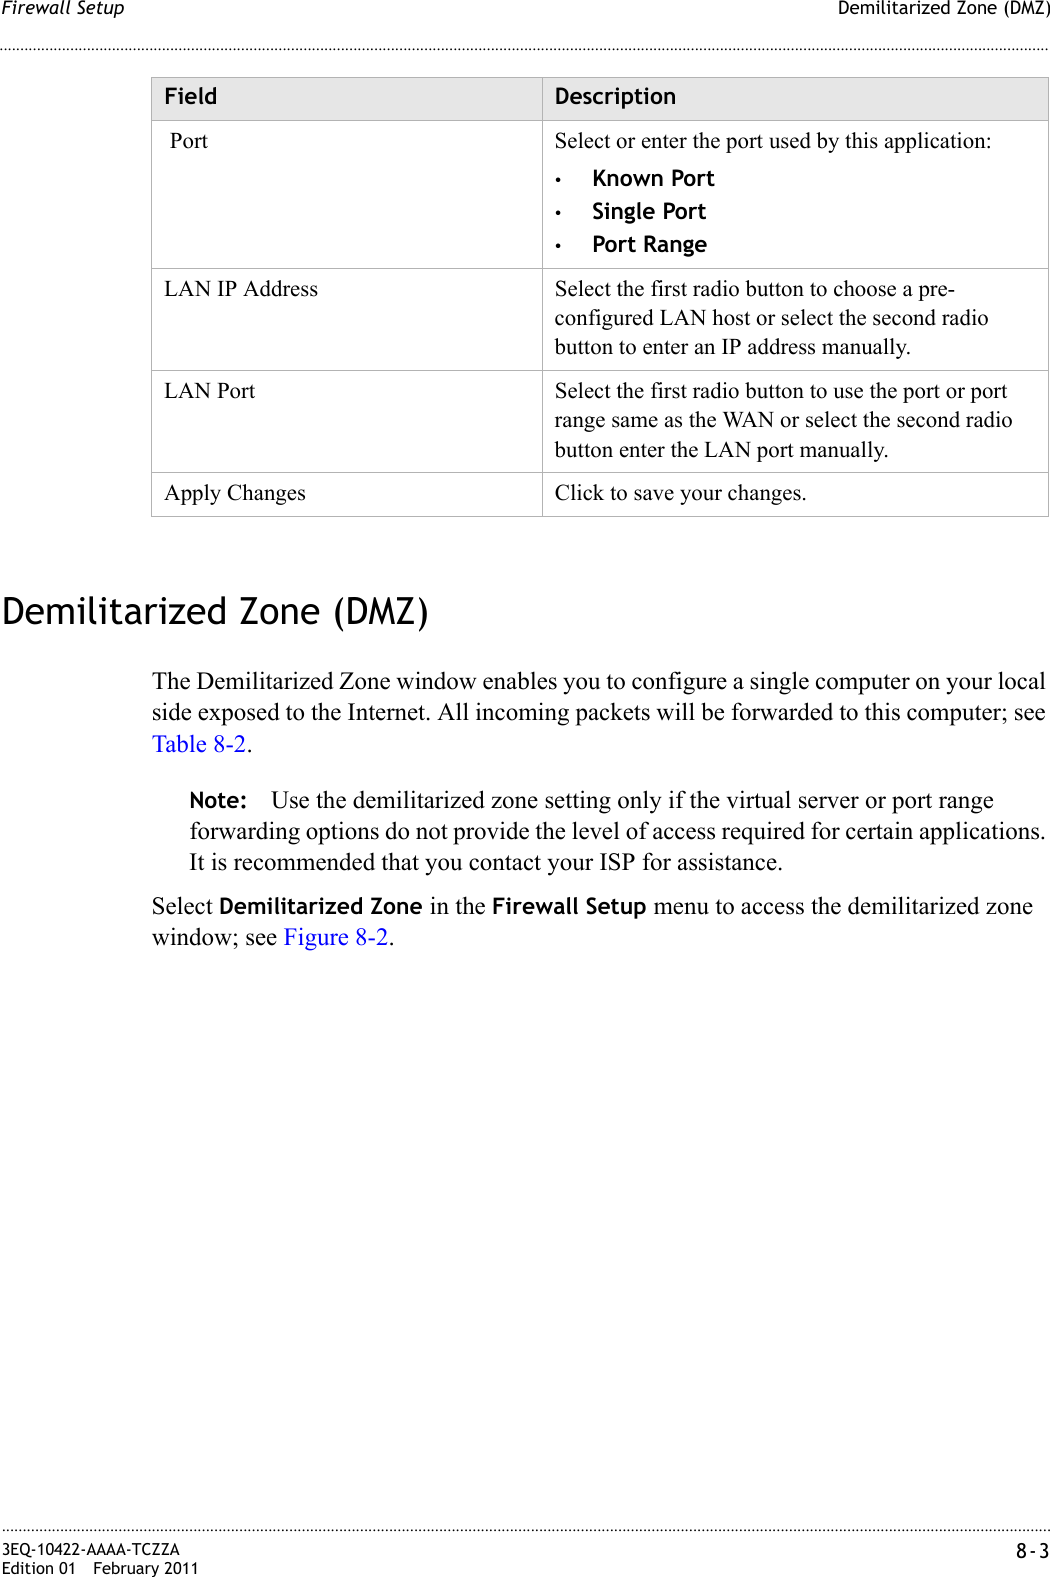 Demilitarized Zone (DMZ)Firewall Setup............................................................................................................................................................................................................................................................3EQ-10422-AAAA-TCZZAEdition 01 February 2011 8-3............................................................................................................................................................................................................................................................Demilitarized Zone (DMZ)The Demilitarized Zone window enables you to configure a single computer on your local side exposed to the Internet. All incoming packets will be forwarded to this computer; see Table 8-2.Note: Use the demilitarized zone setting only if the virtual server or port range forwarding options do not provide the level of access required for certain applications. It is recommended that you contact your ISP for assistance.Select Demilitarized Zone in the Firewall Setup menu to access the demilitarized zone window; see Figure 8-2. Port Select or enter the port used by this application:•Known Port•Single Port•Port RangeLAN IP Address Select the first radio button to choose a pre-configured LAN host or select the second radio button to enter an IP address manually.LAN Port Select the first radio button to use the port or port range same as the WAN or select the second radio button enter the LAN port manually.Apply Changes Click to save your changes.Field Description